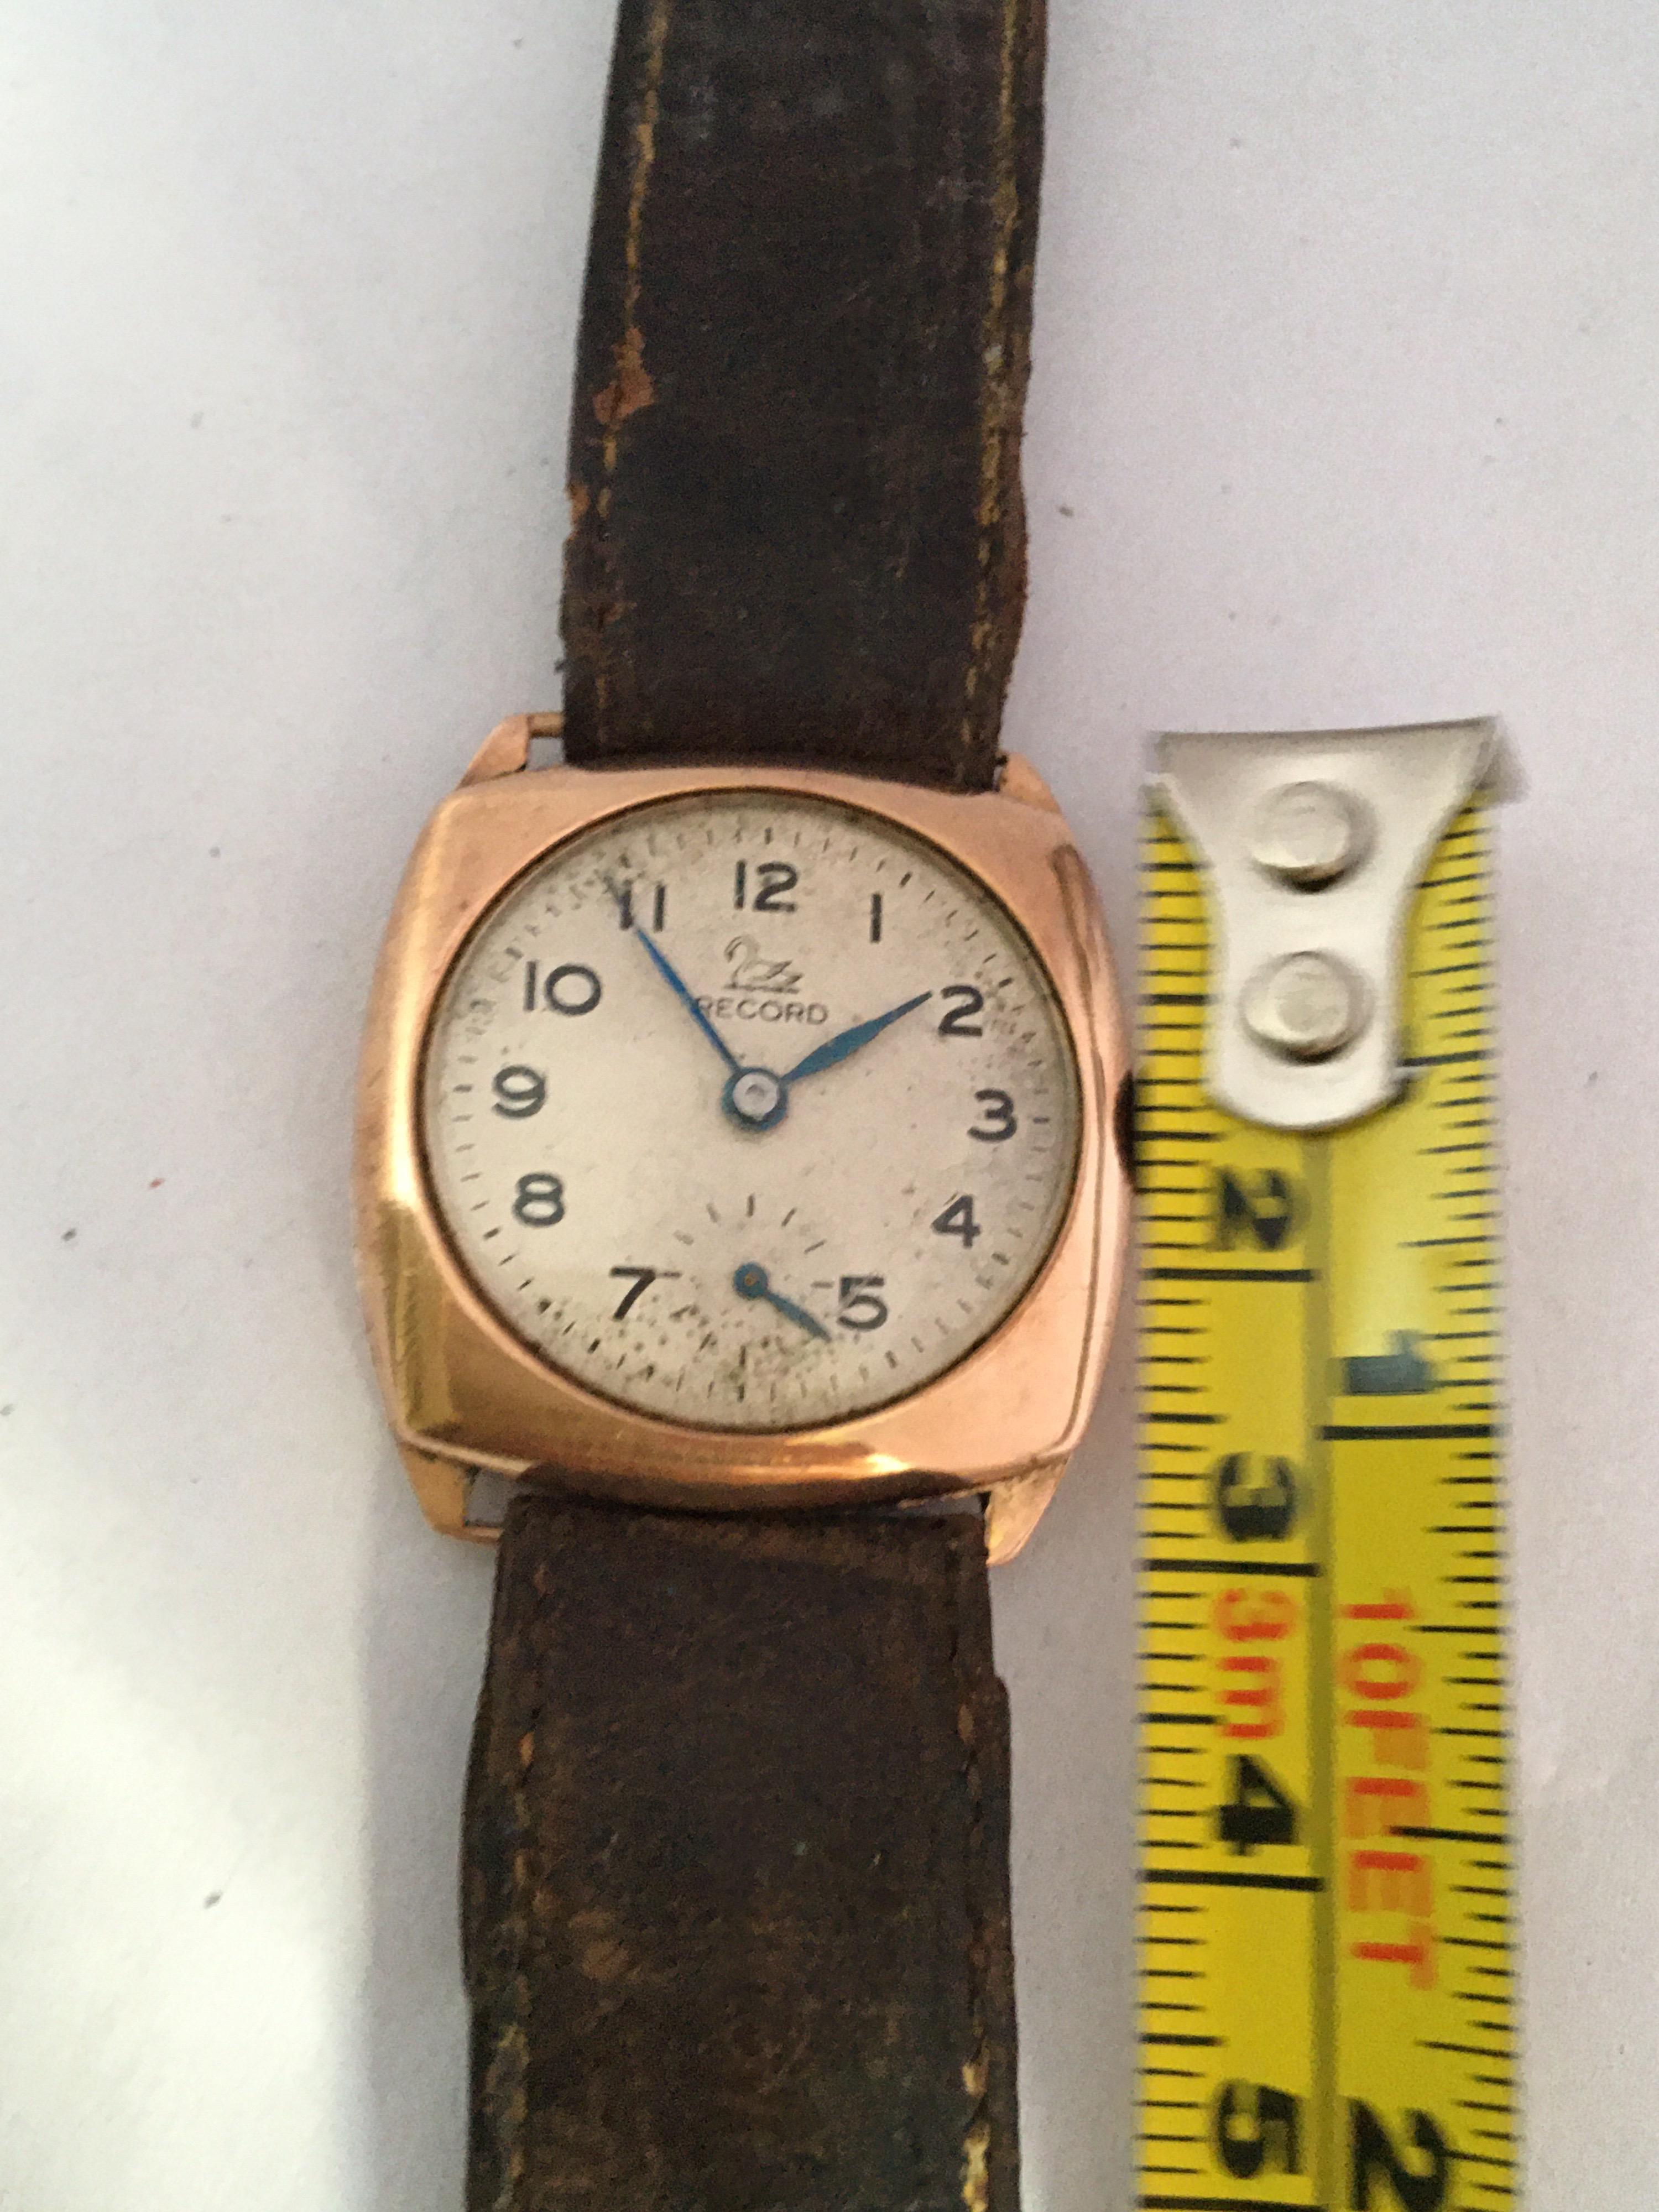 9 Karat Gold Vintage 1950s Récord Cushion Shaped Mechanical Watch For Sale 5